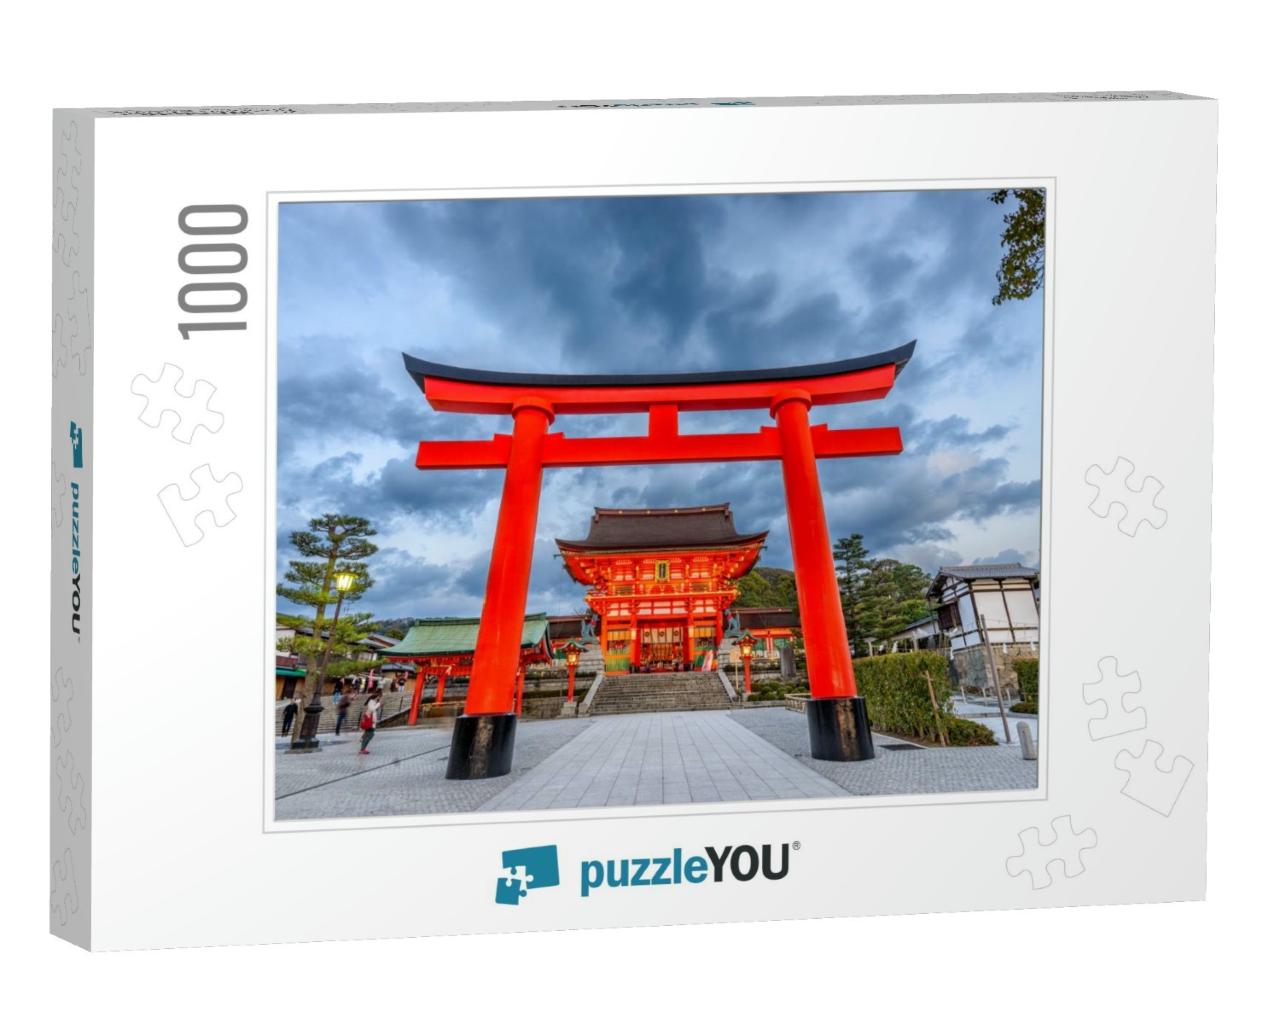 Fushimi Inari Shrine in Kyoto, Japan... Jigsaw Puzzle with 1000 pieces